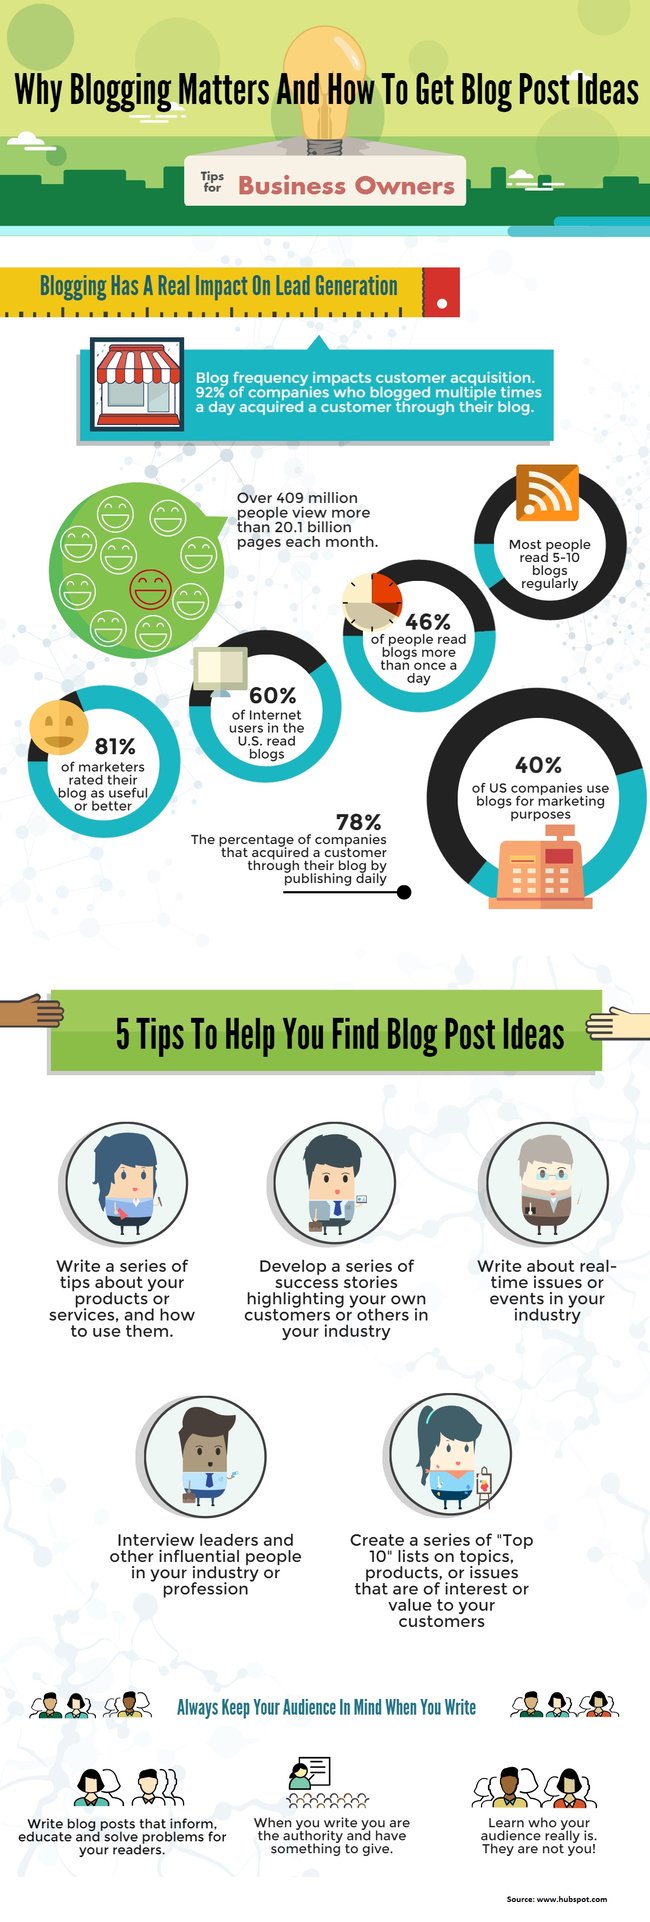 how-to-get-blog-post-ideas